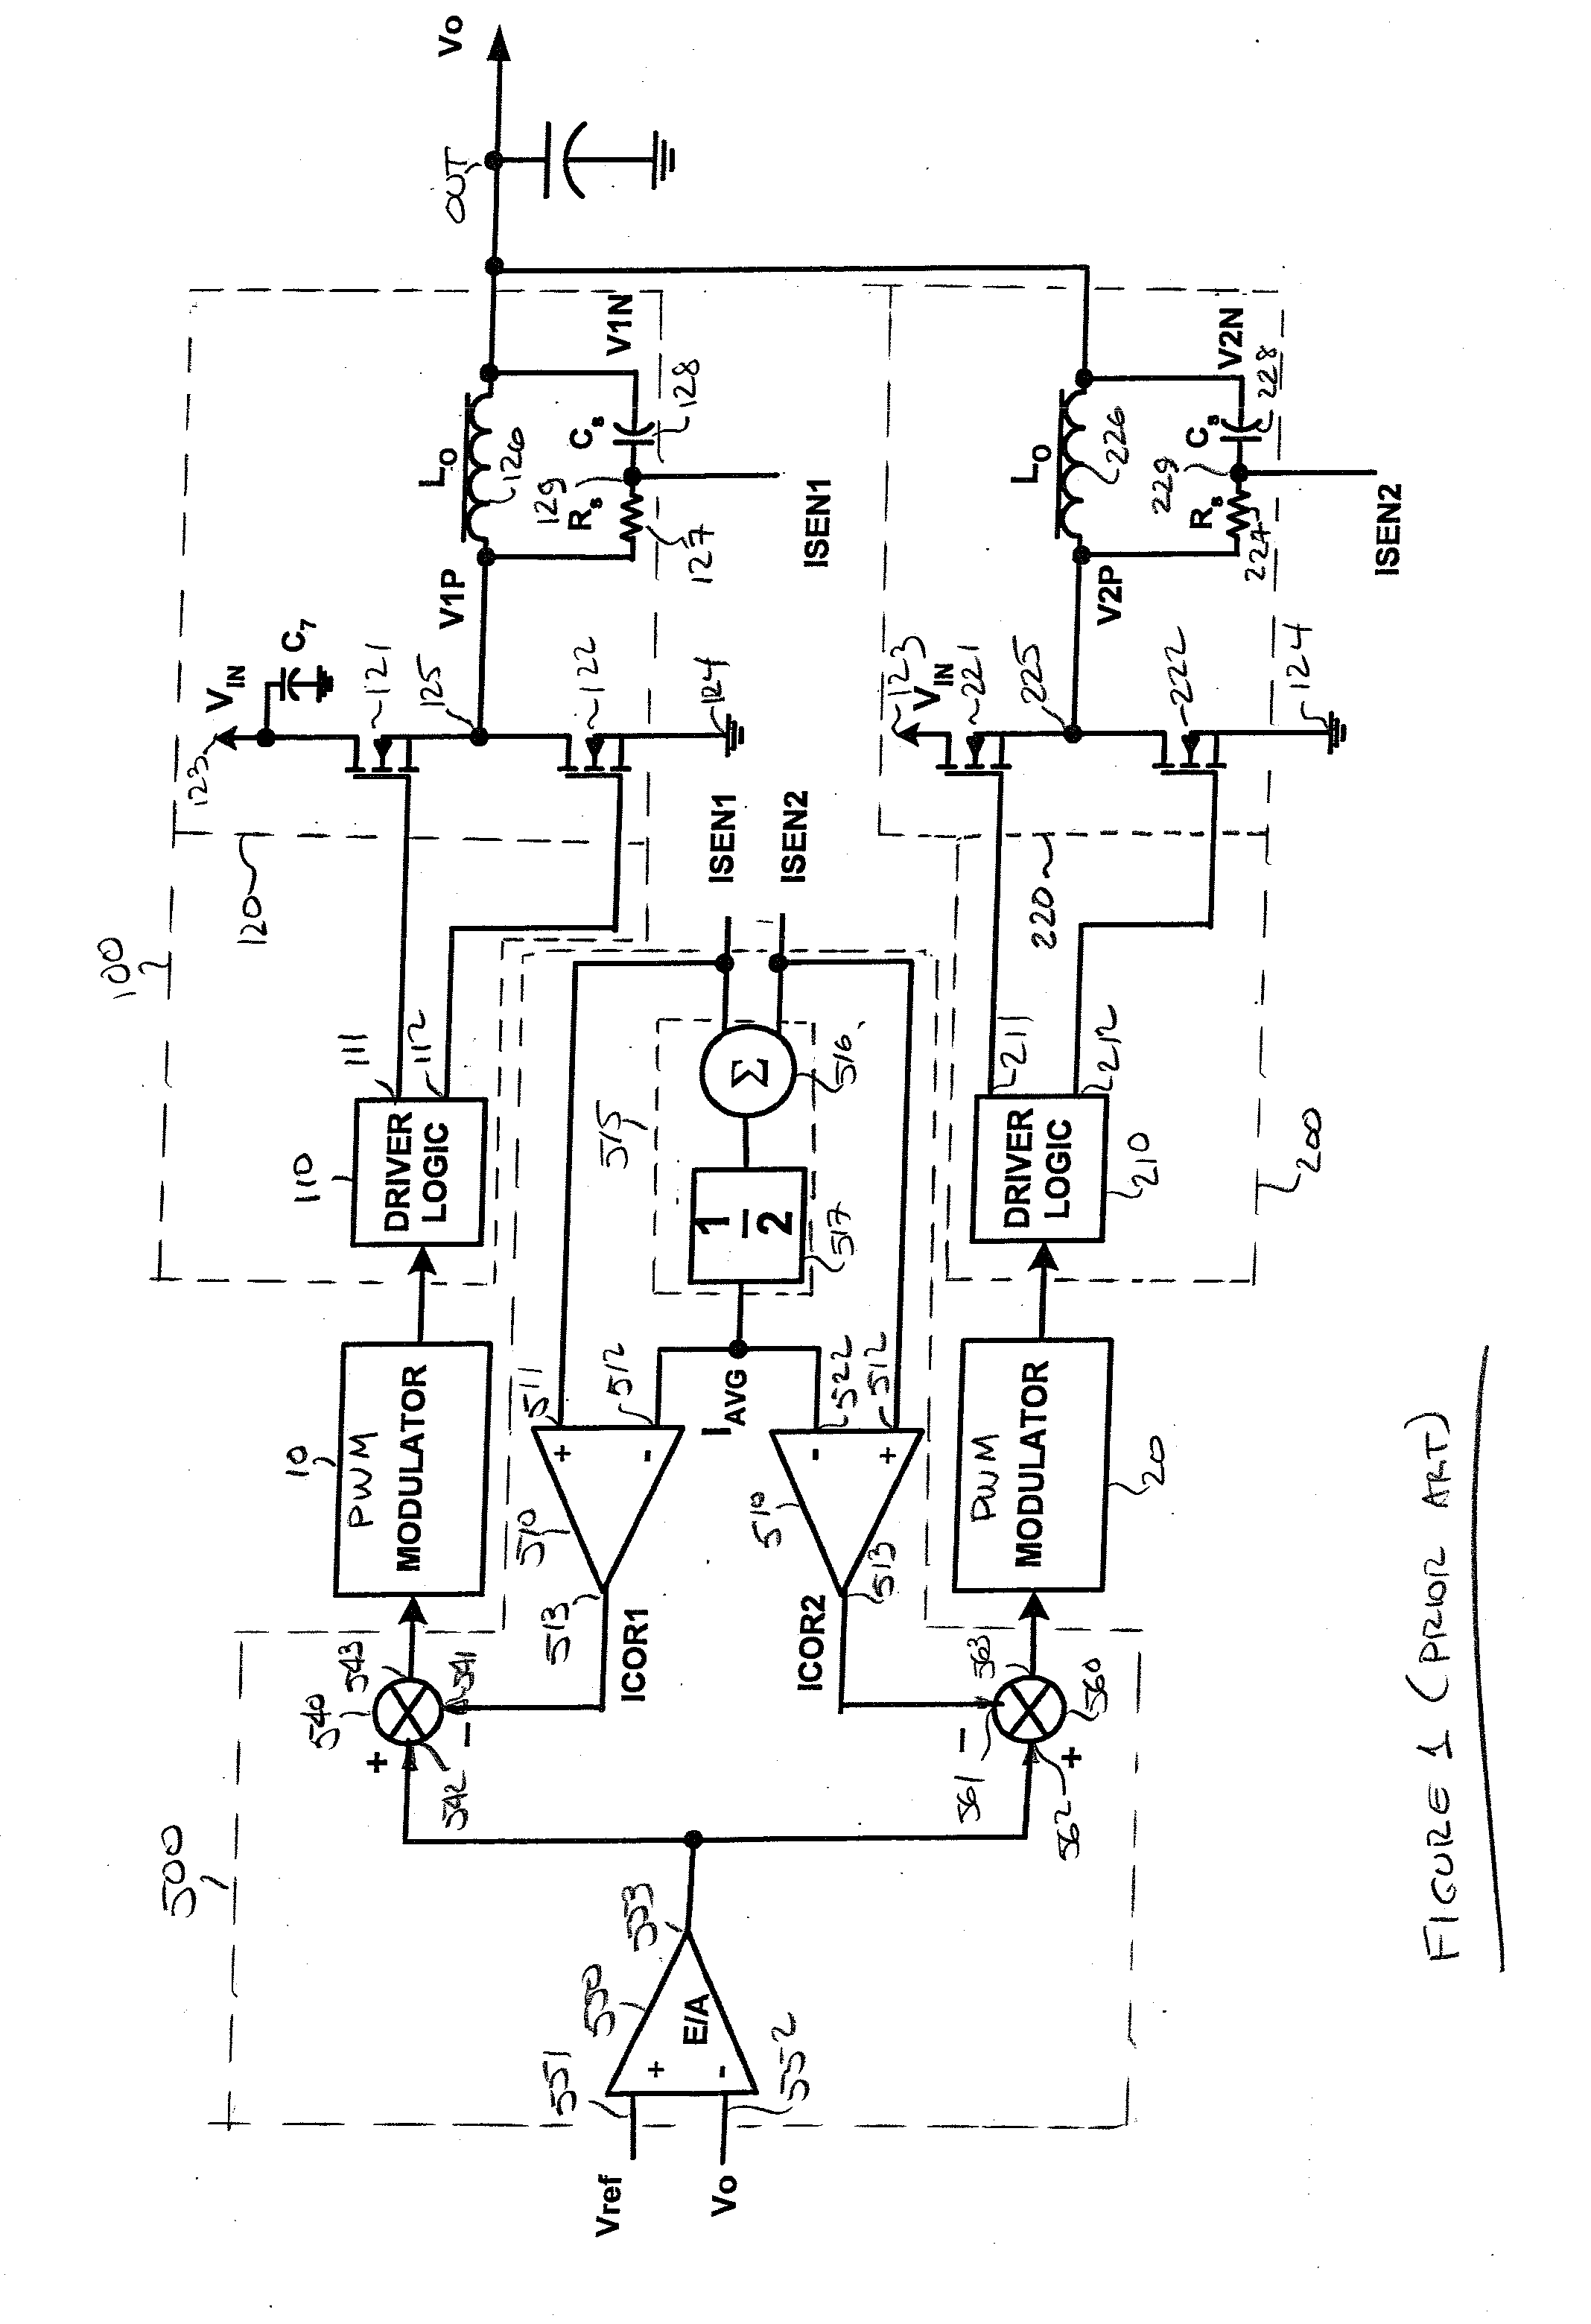 Multi-phase dc-dc converter using auxiliary resistor network to feed back multiple single-ended sensed currents to supervisory controller for balanced current-sharing among plural channels